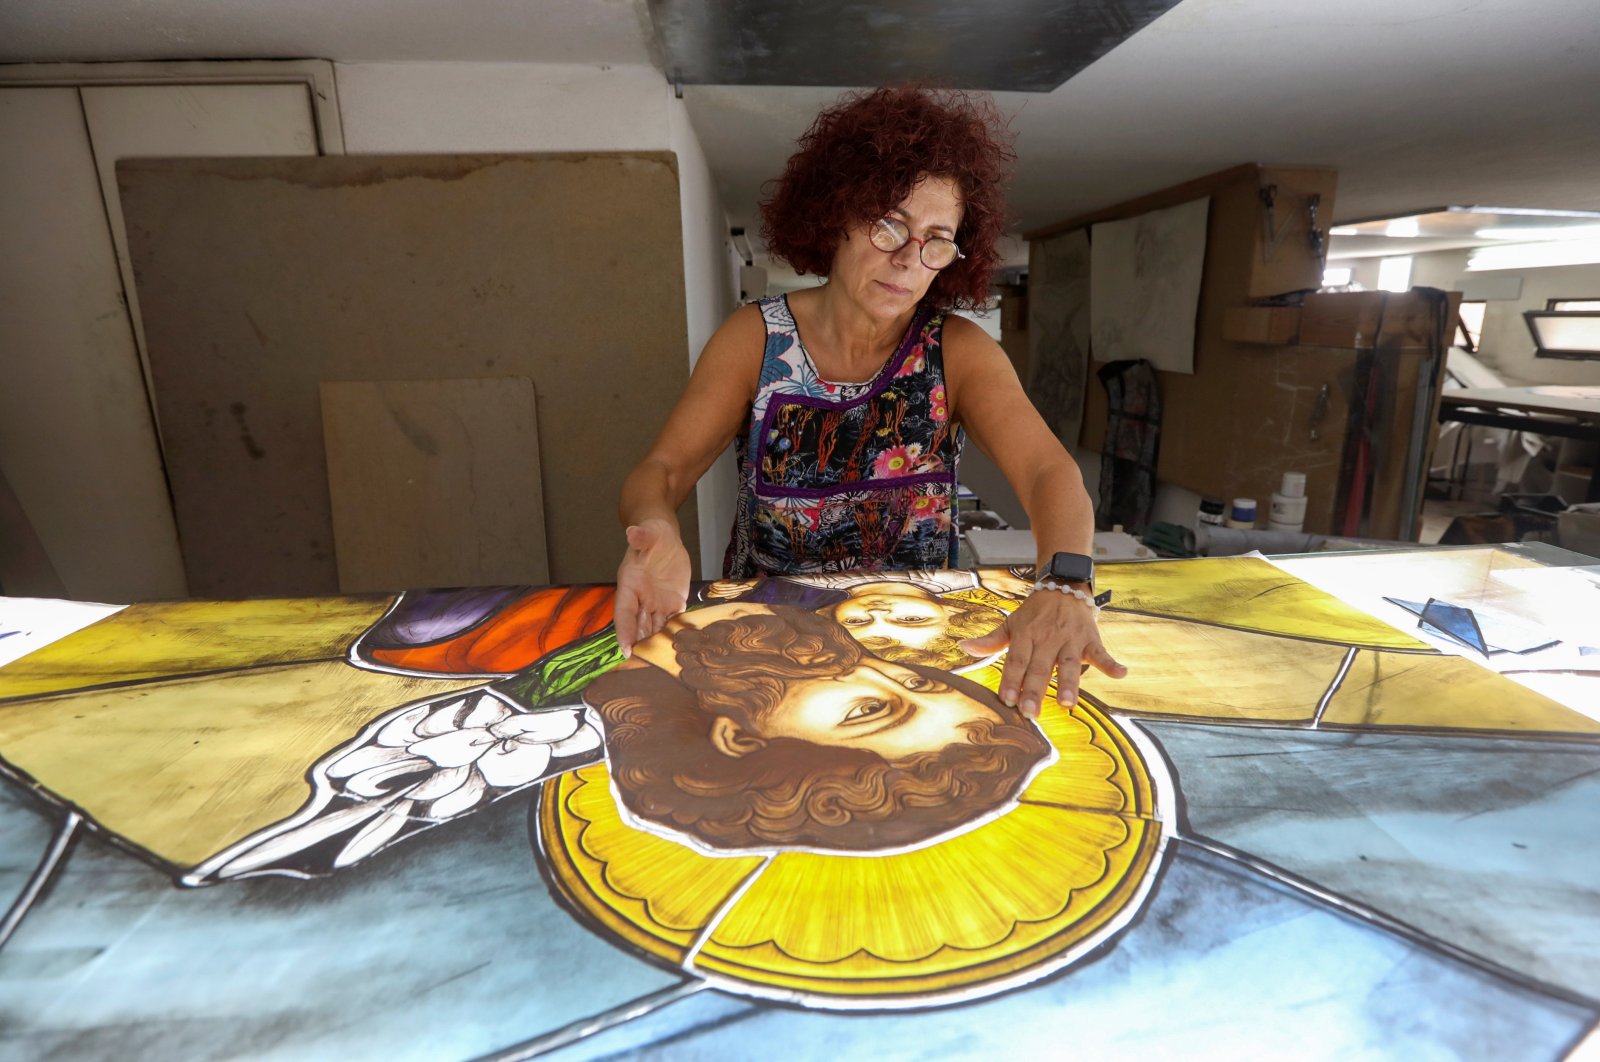 Stained glass maker Maya Husseini works inside her workshop in Hazmiyeh, Lebanon on Aug. 13, 2020. (Reuters Photo)